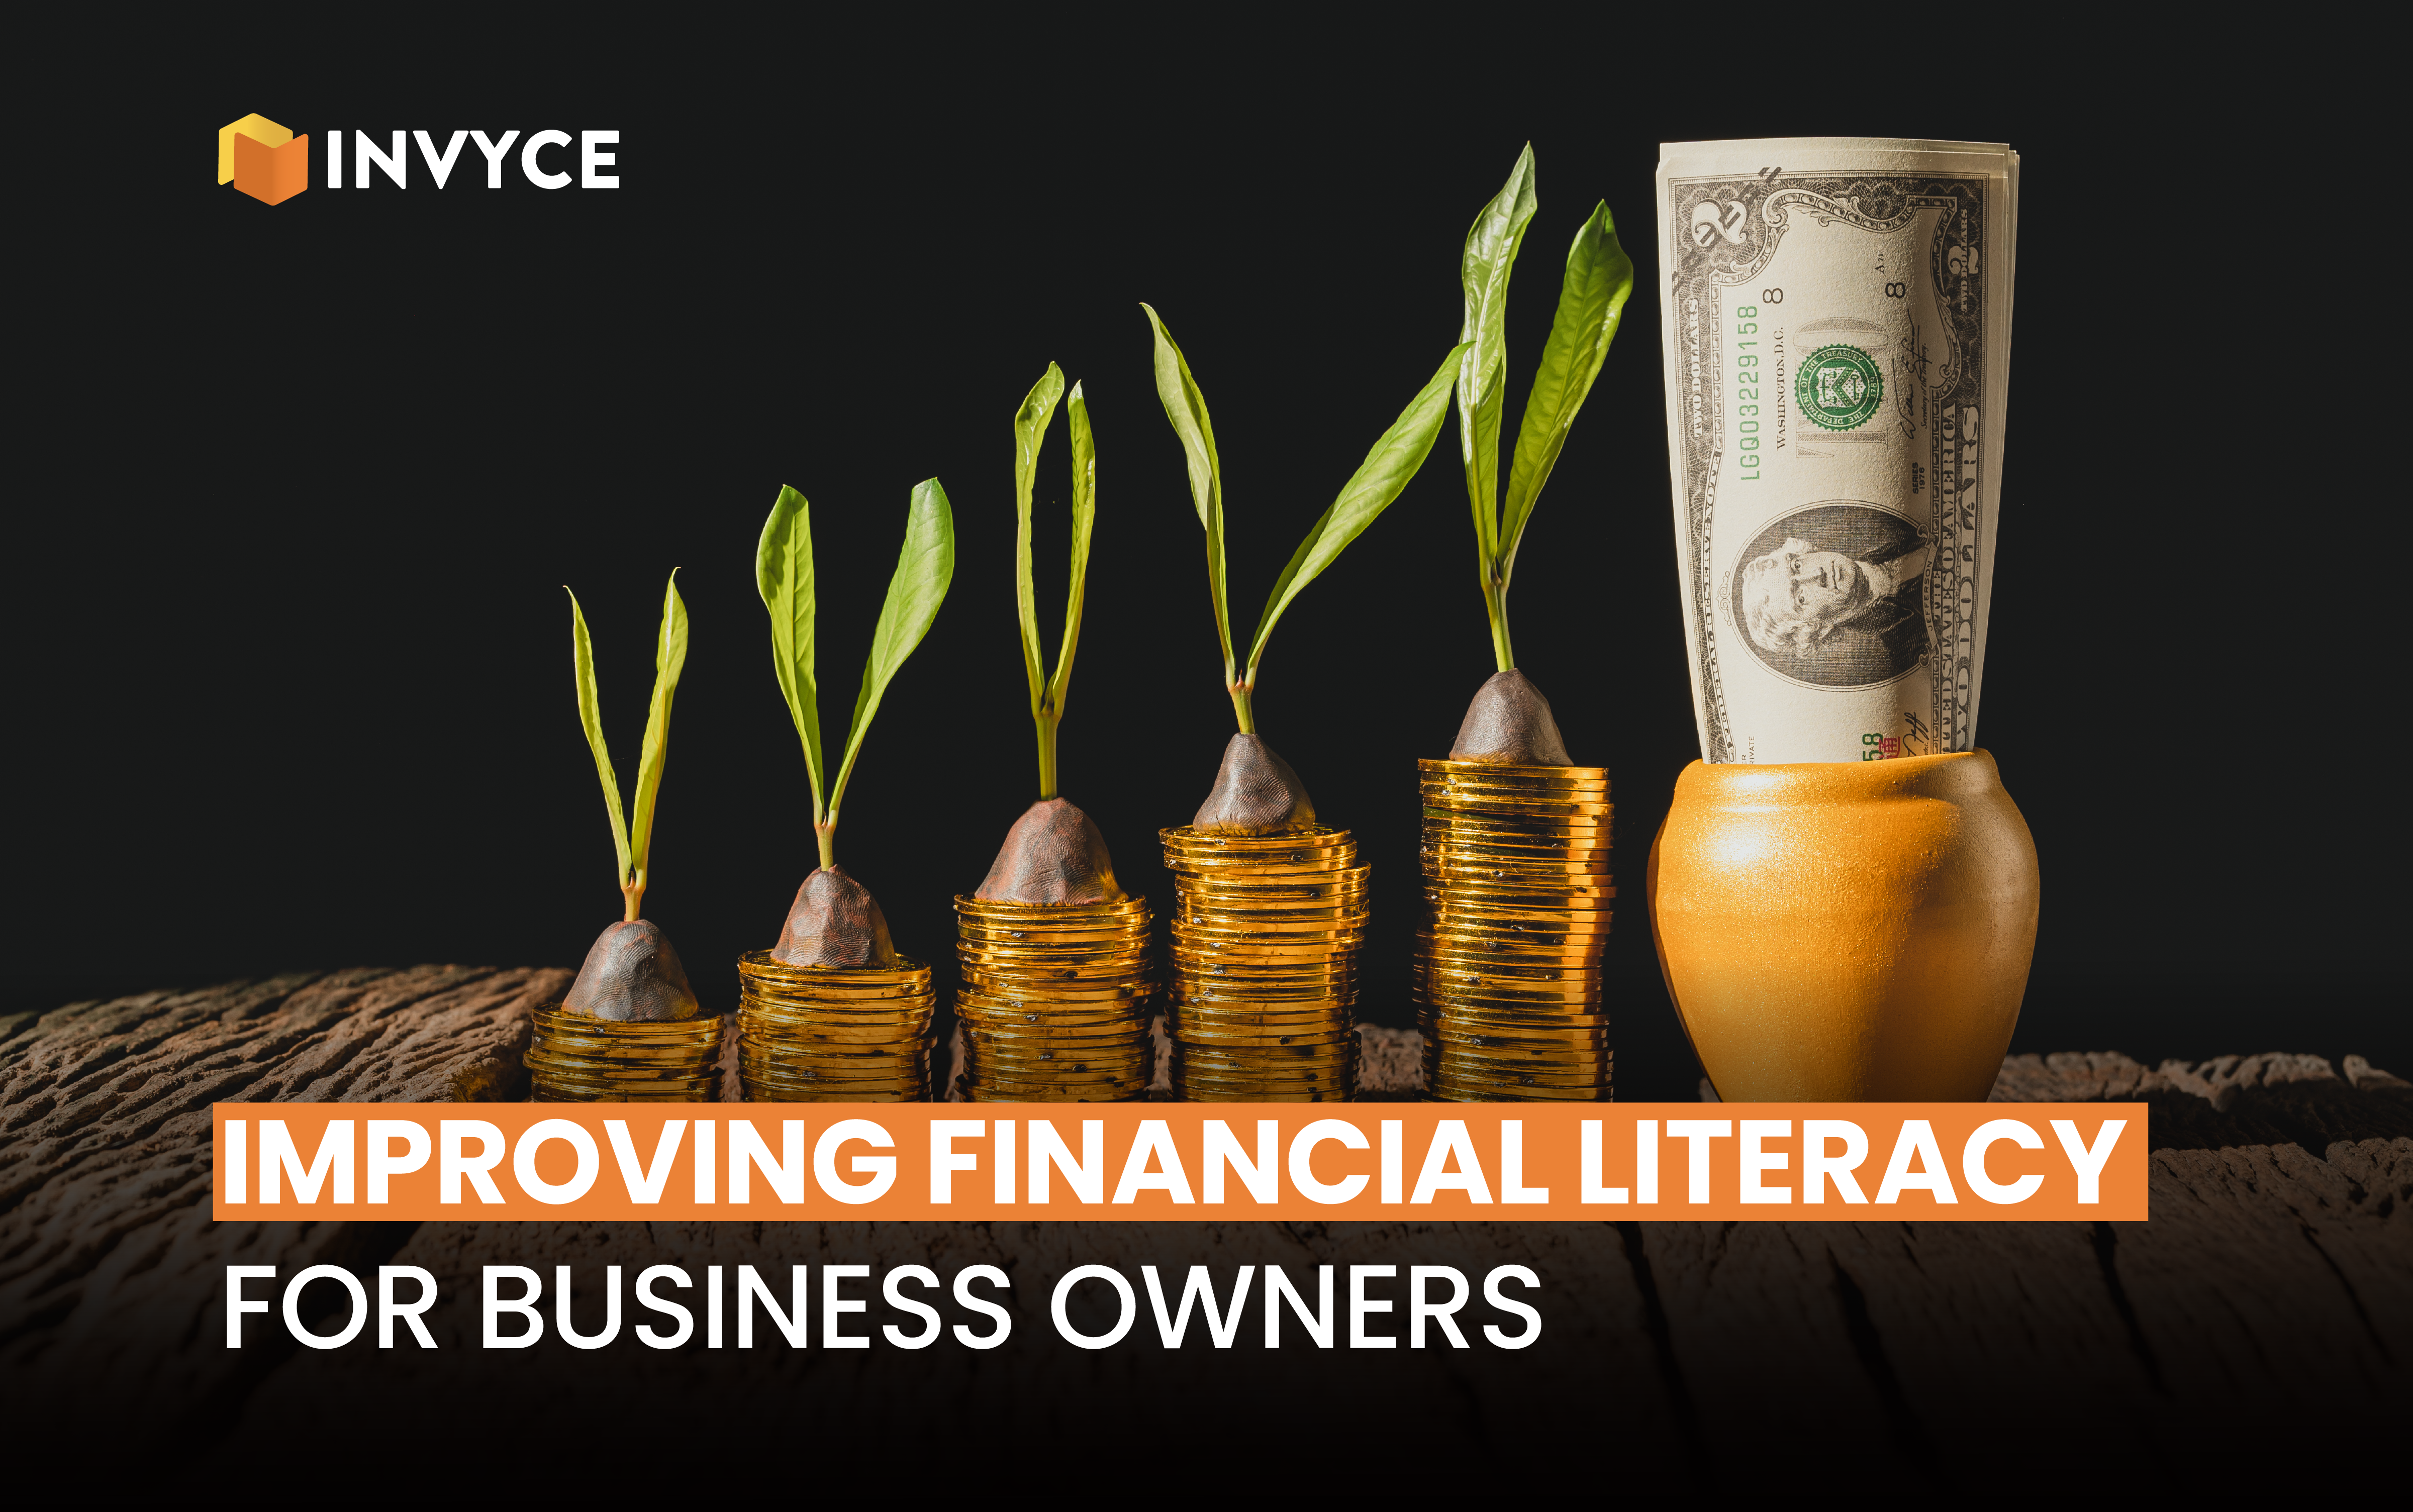 #Improving Financial Literacy for Business Owners